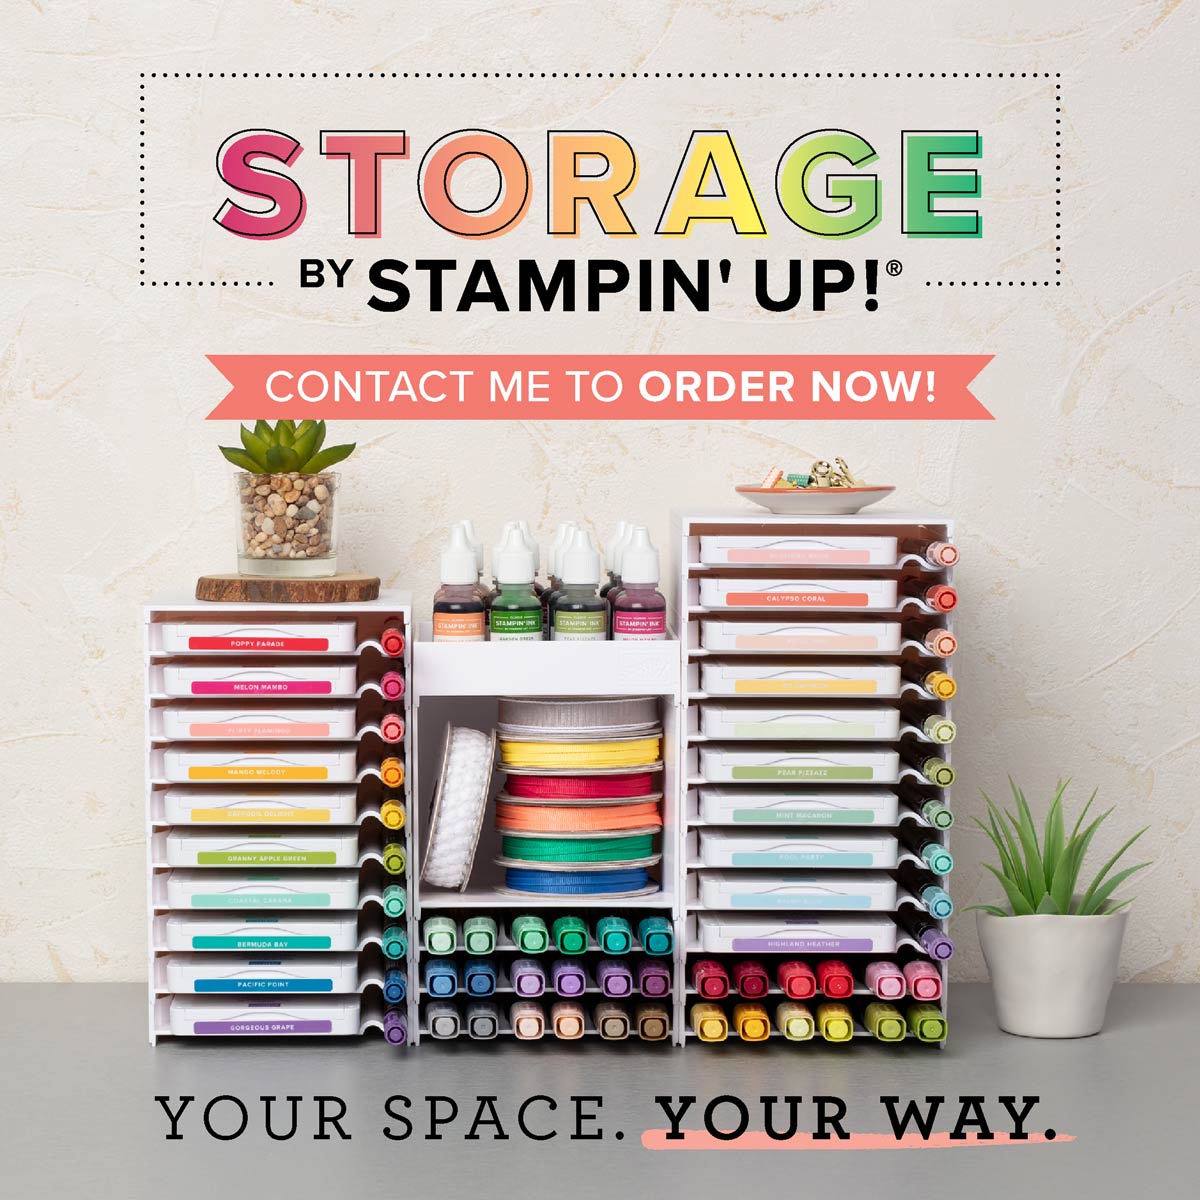 Storage by Stampin’ Up! ®